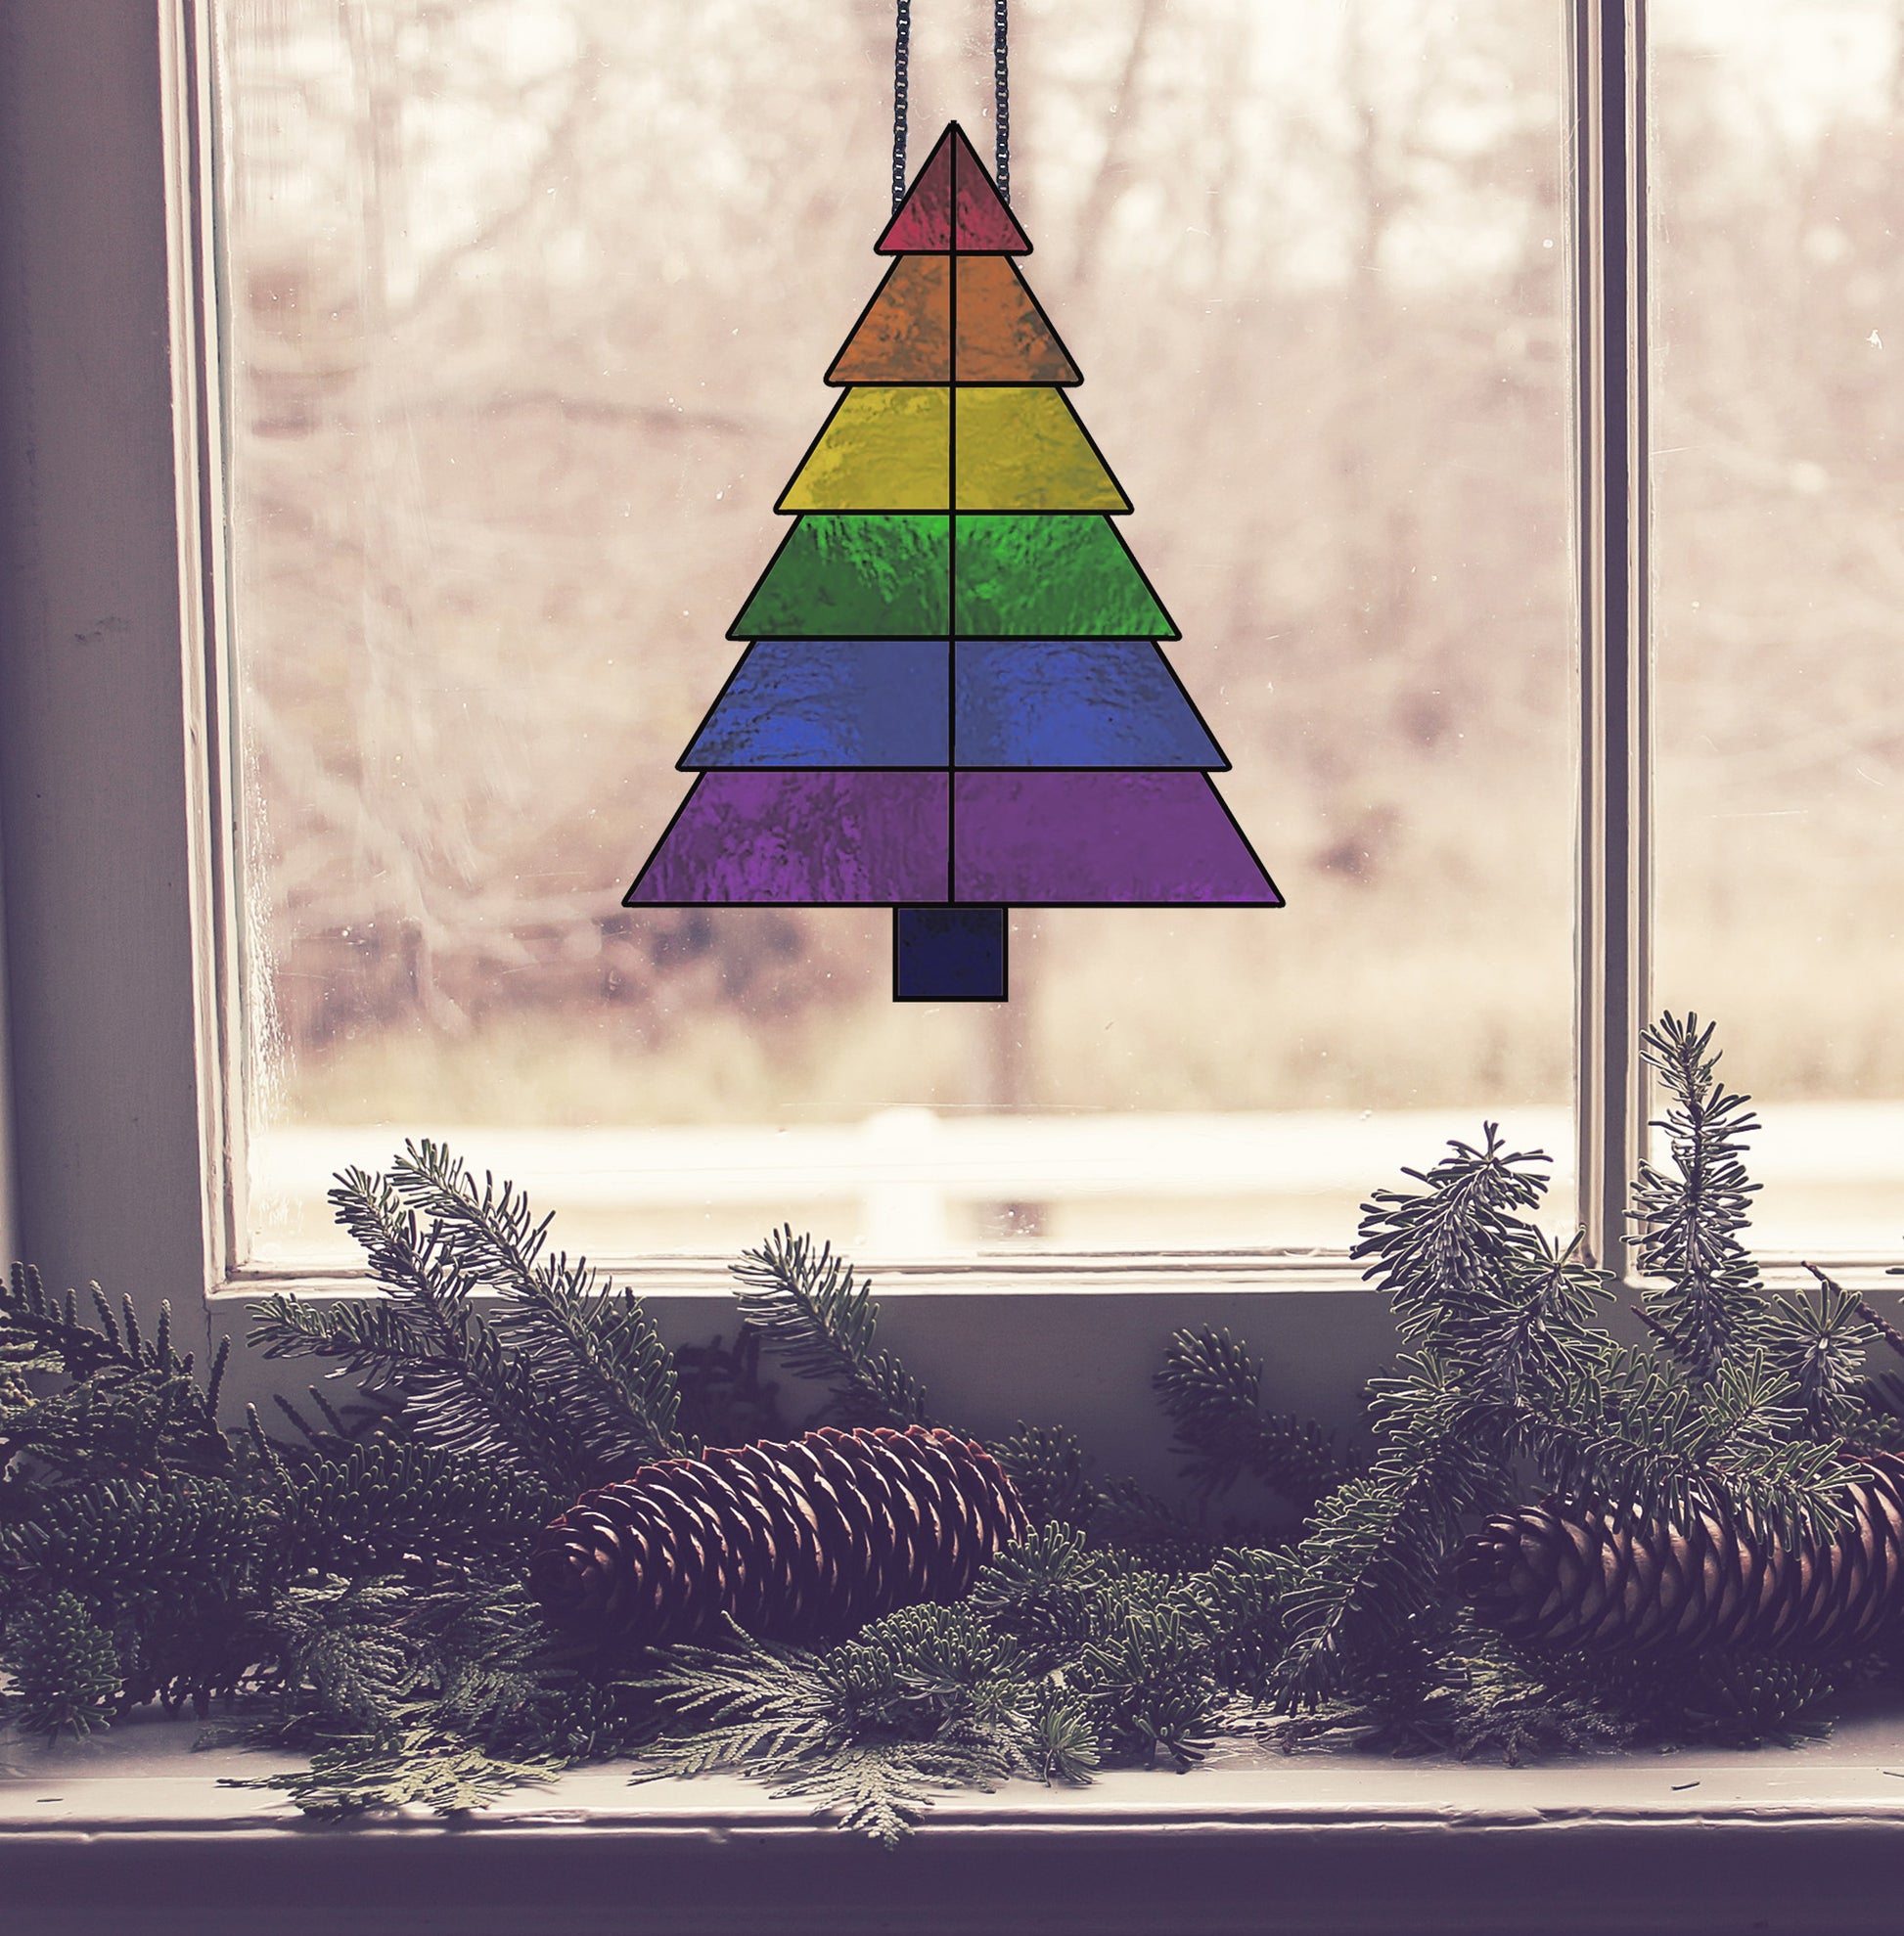 Beginner stained glass pattern for a rainbow Christmas tree, instant PDF download, shown hanging in a window with pine cones